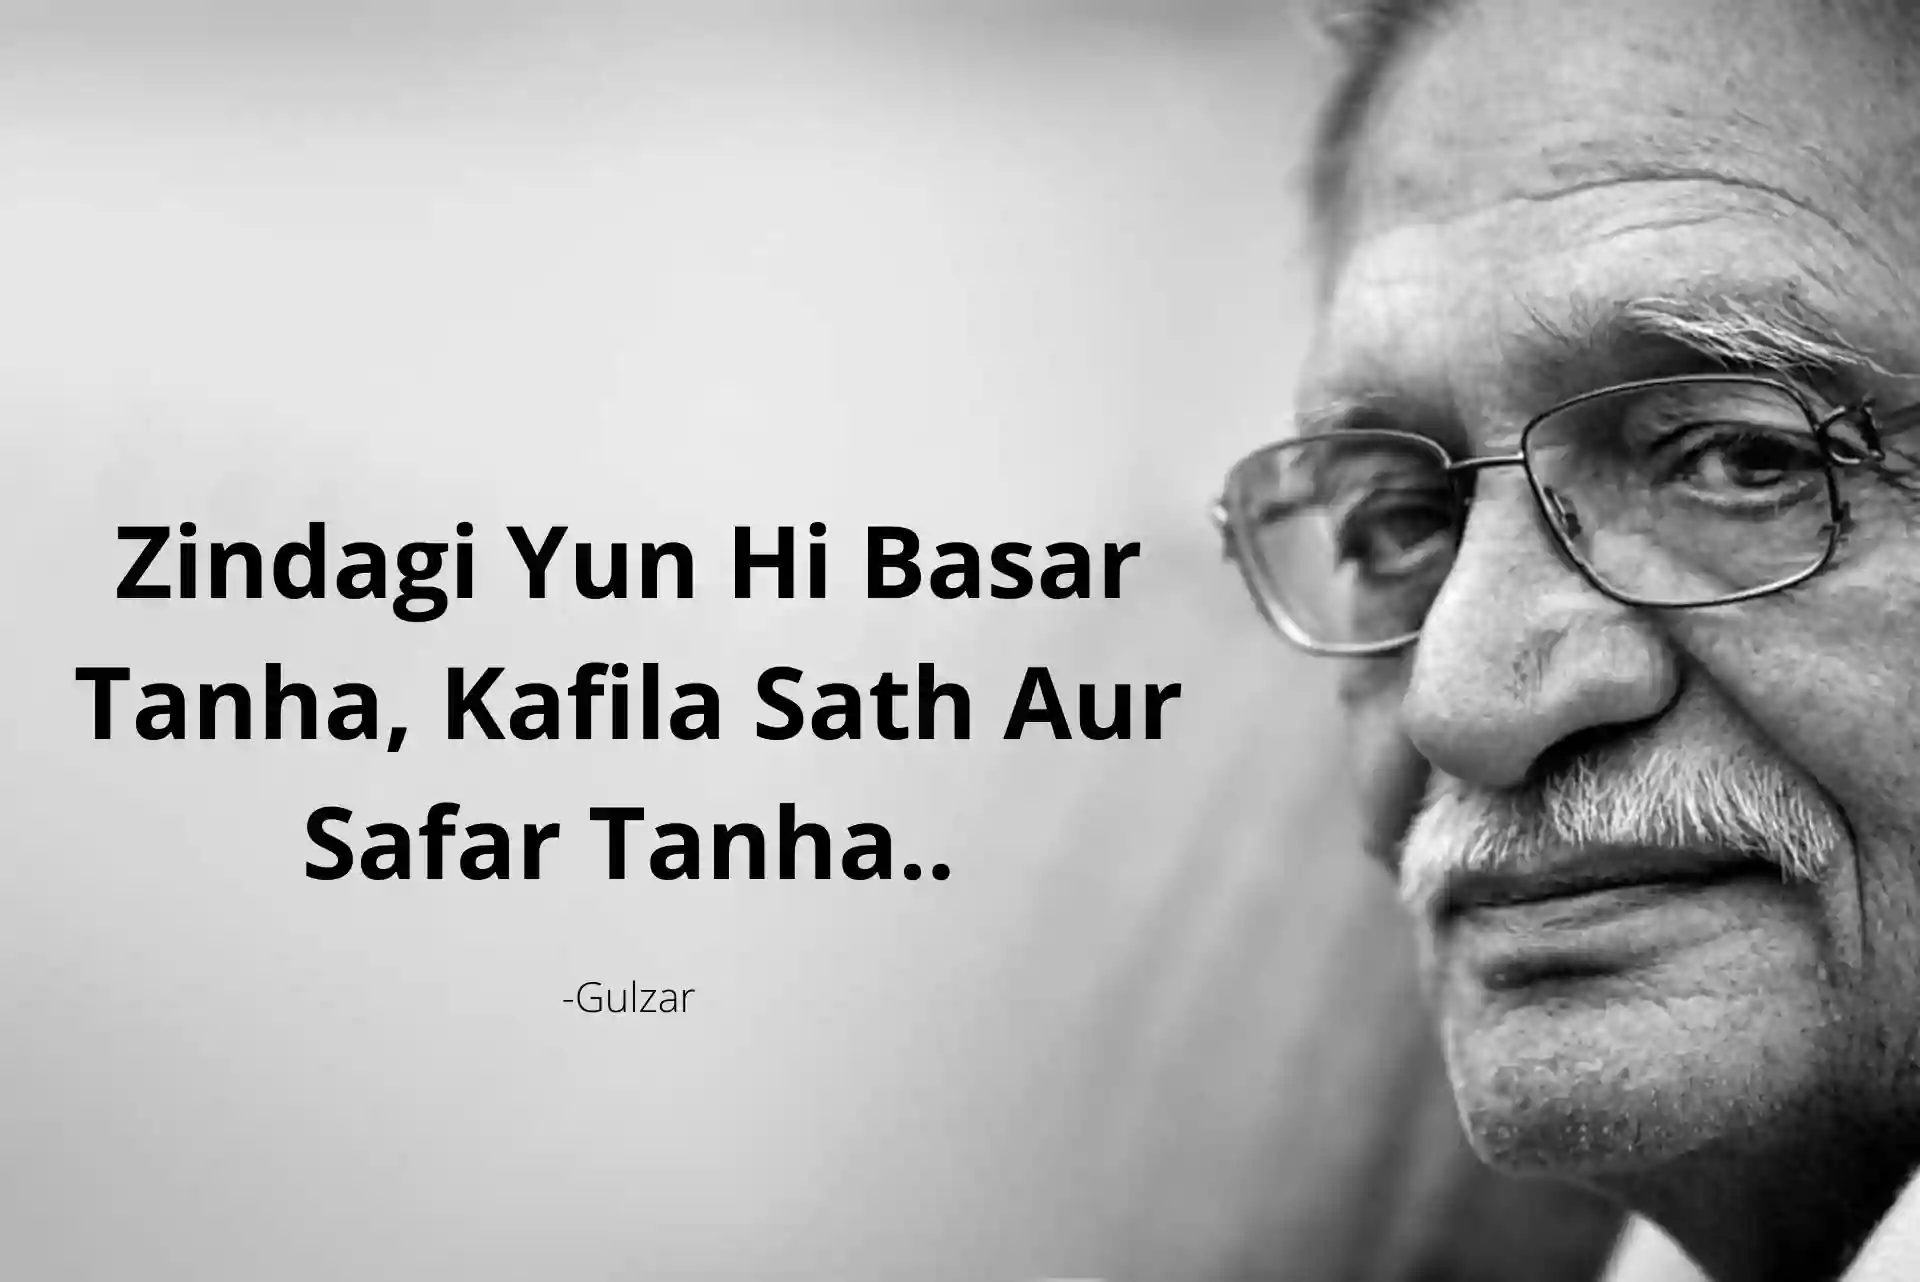 Gulzar Quotes On Life